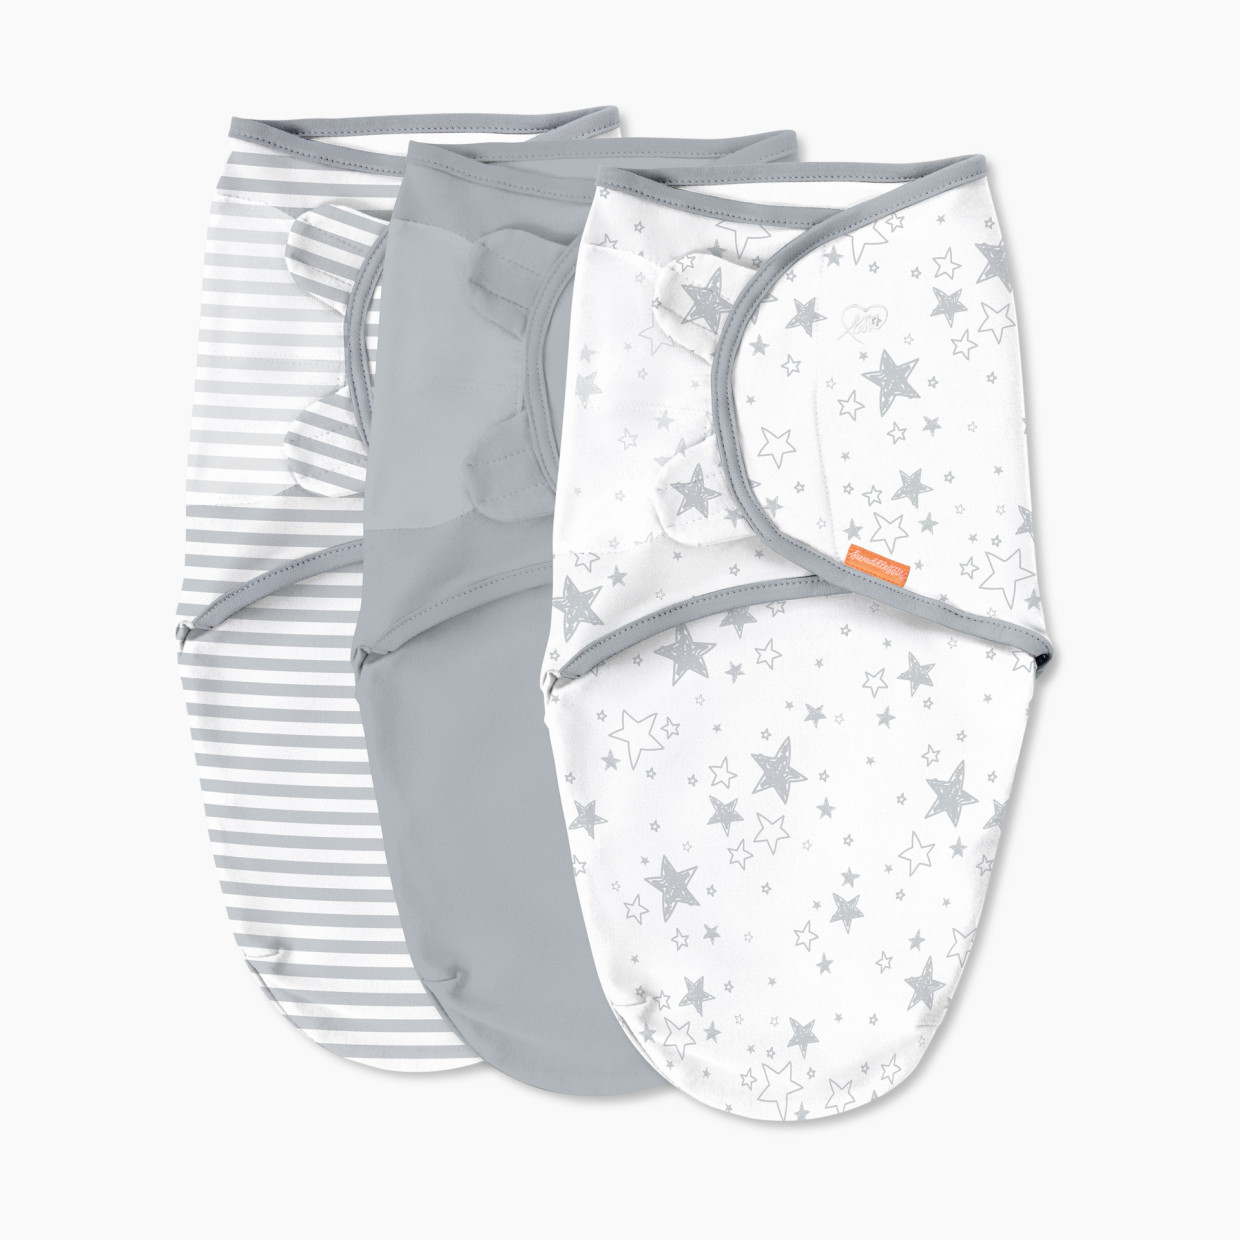 Summer Infant Comfort Pack (3-Pack) - Twinkle Twinkle, S/M.